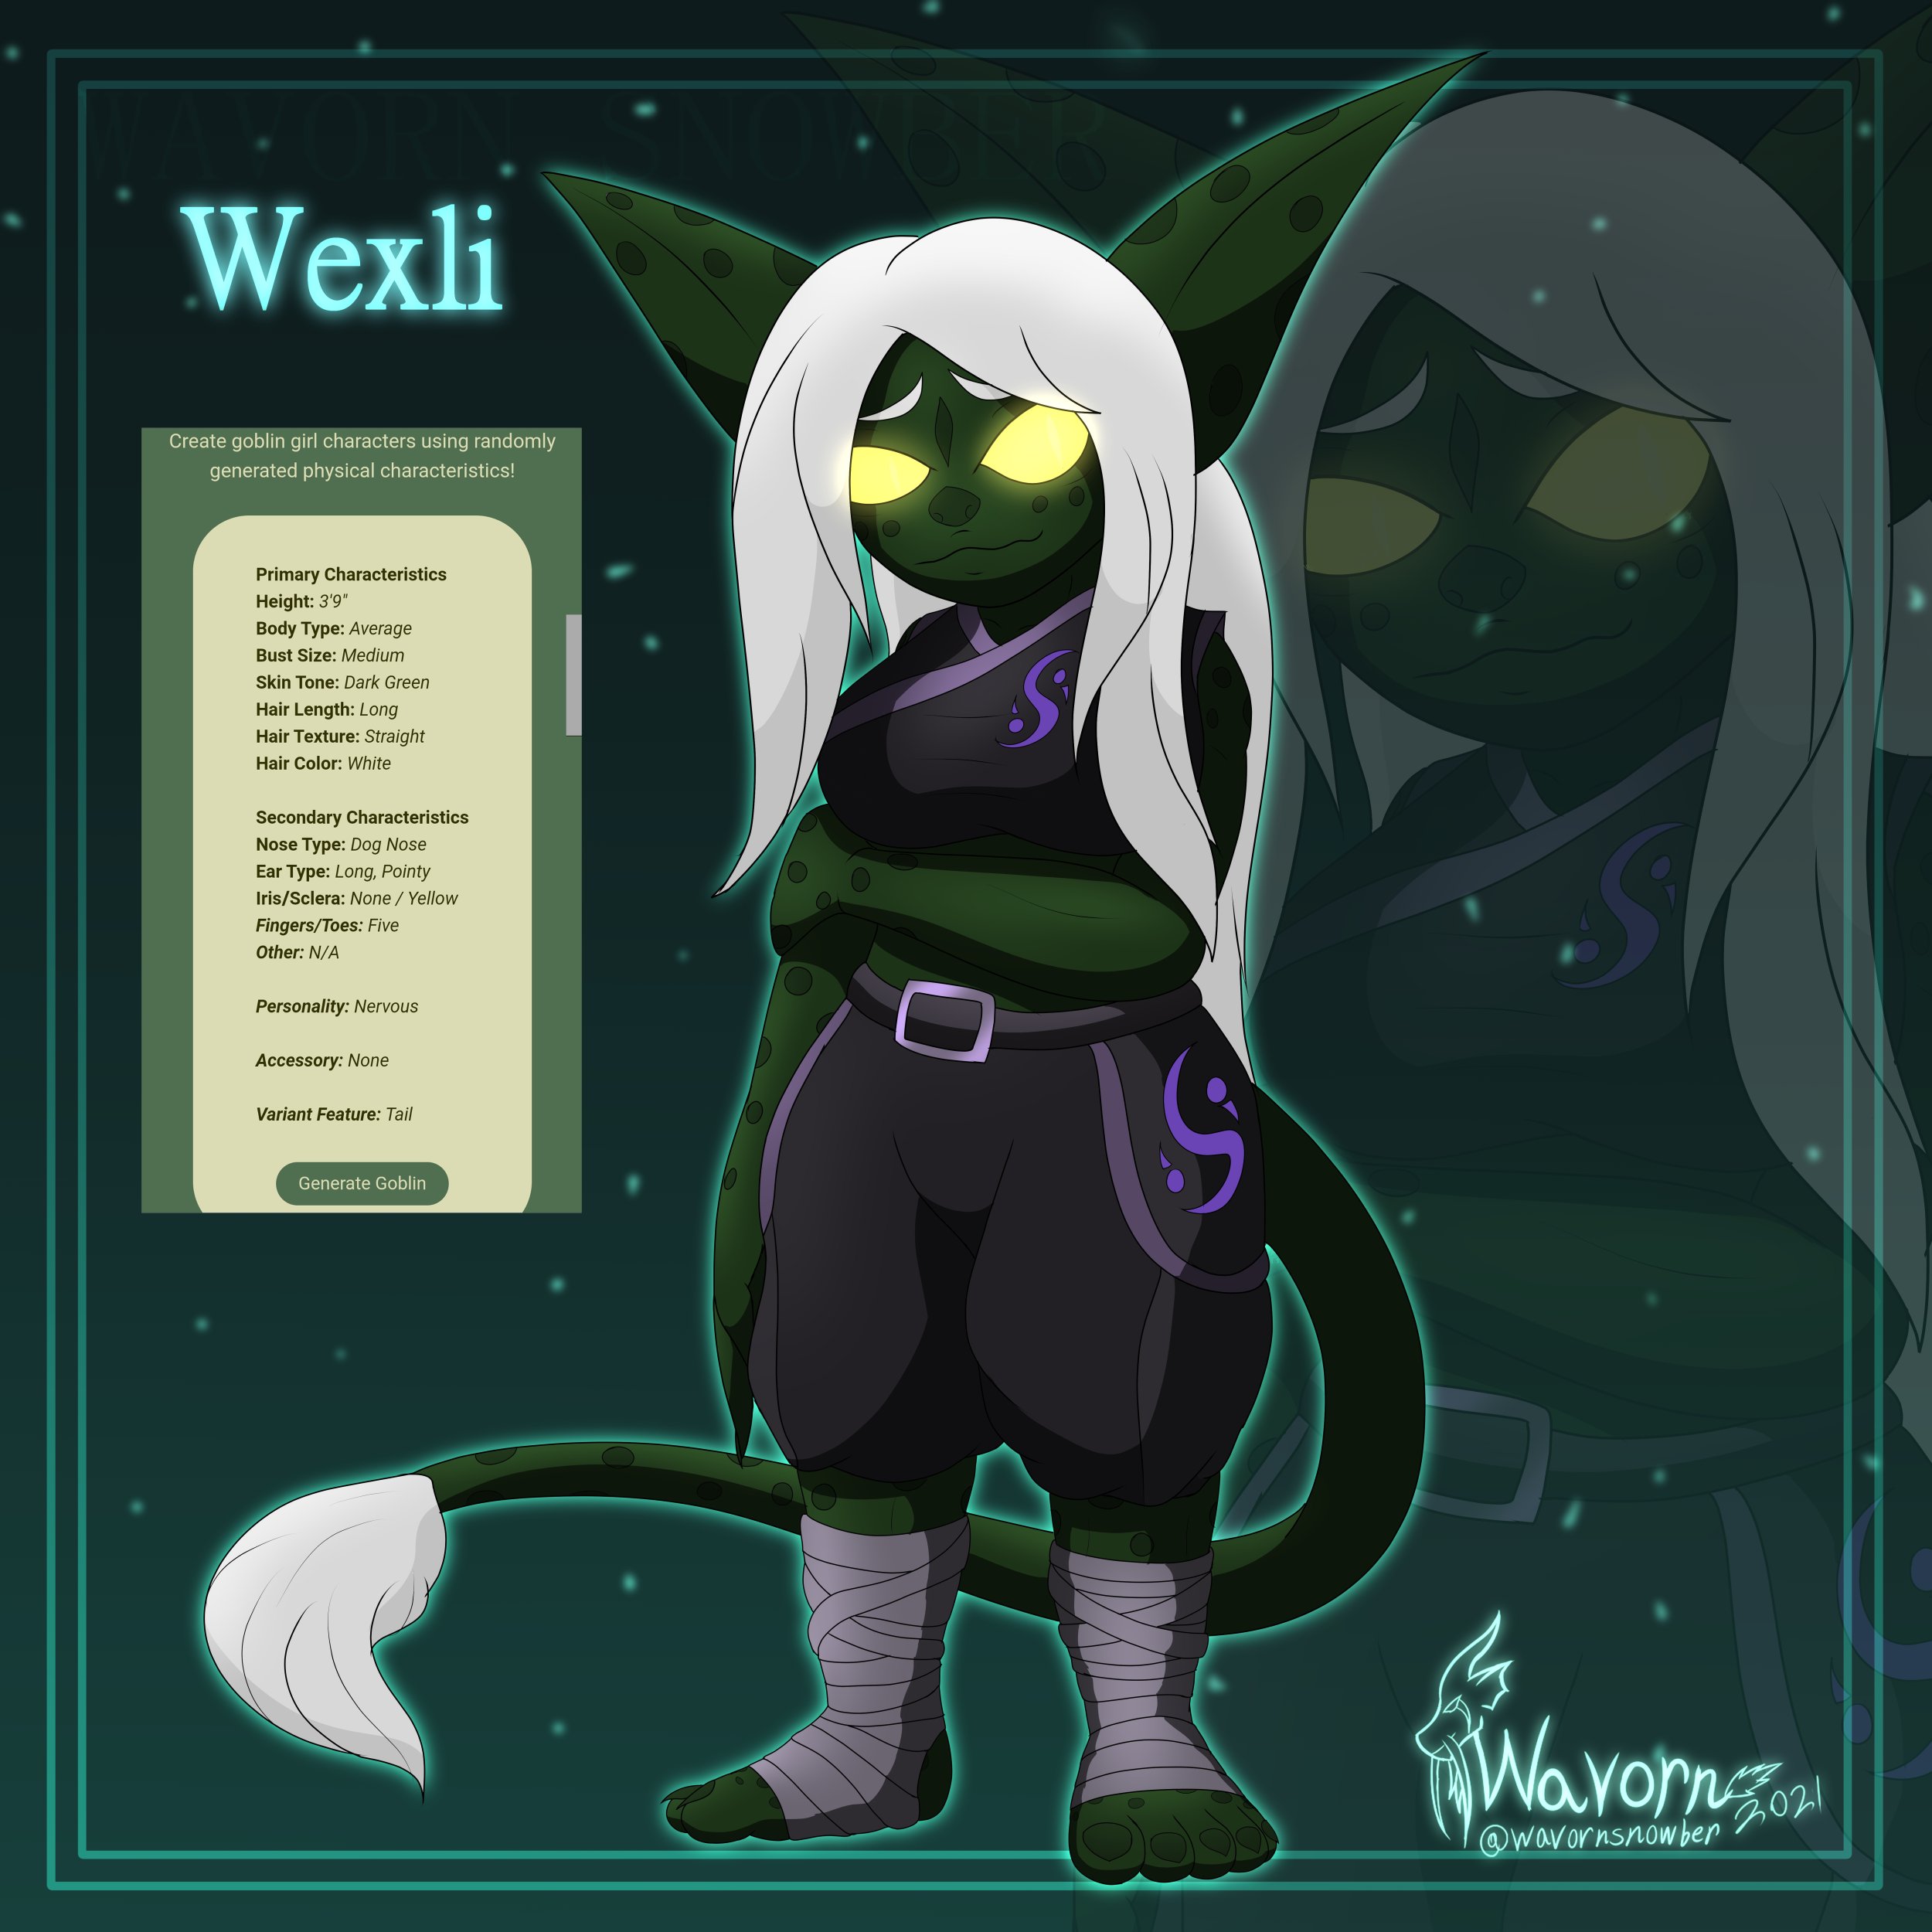 engagement saint card Wavorn 💙 🐲 on Twitter: "Took a spin with @Paracose 's goblin generator  and made Wexli! Already got a backstory for her in mind with a kobold  partner that mentors her in